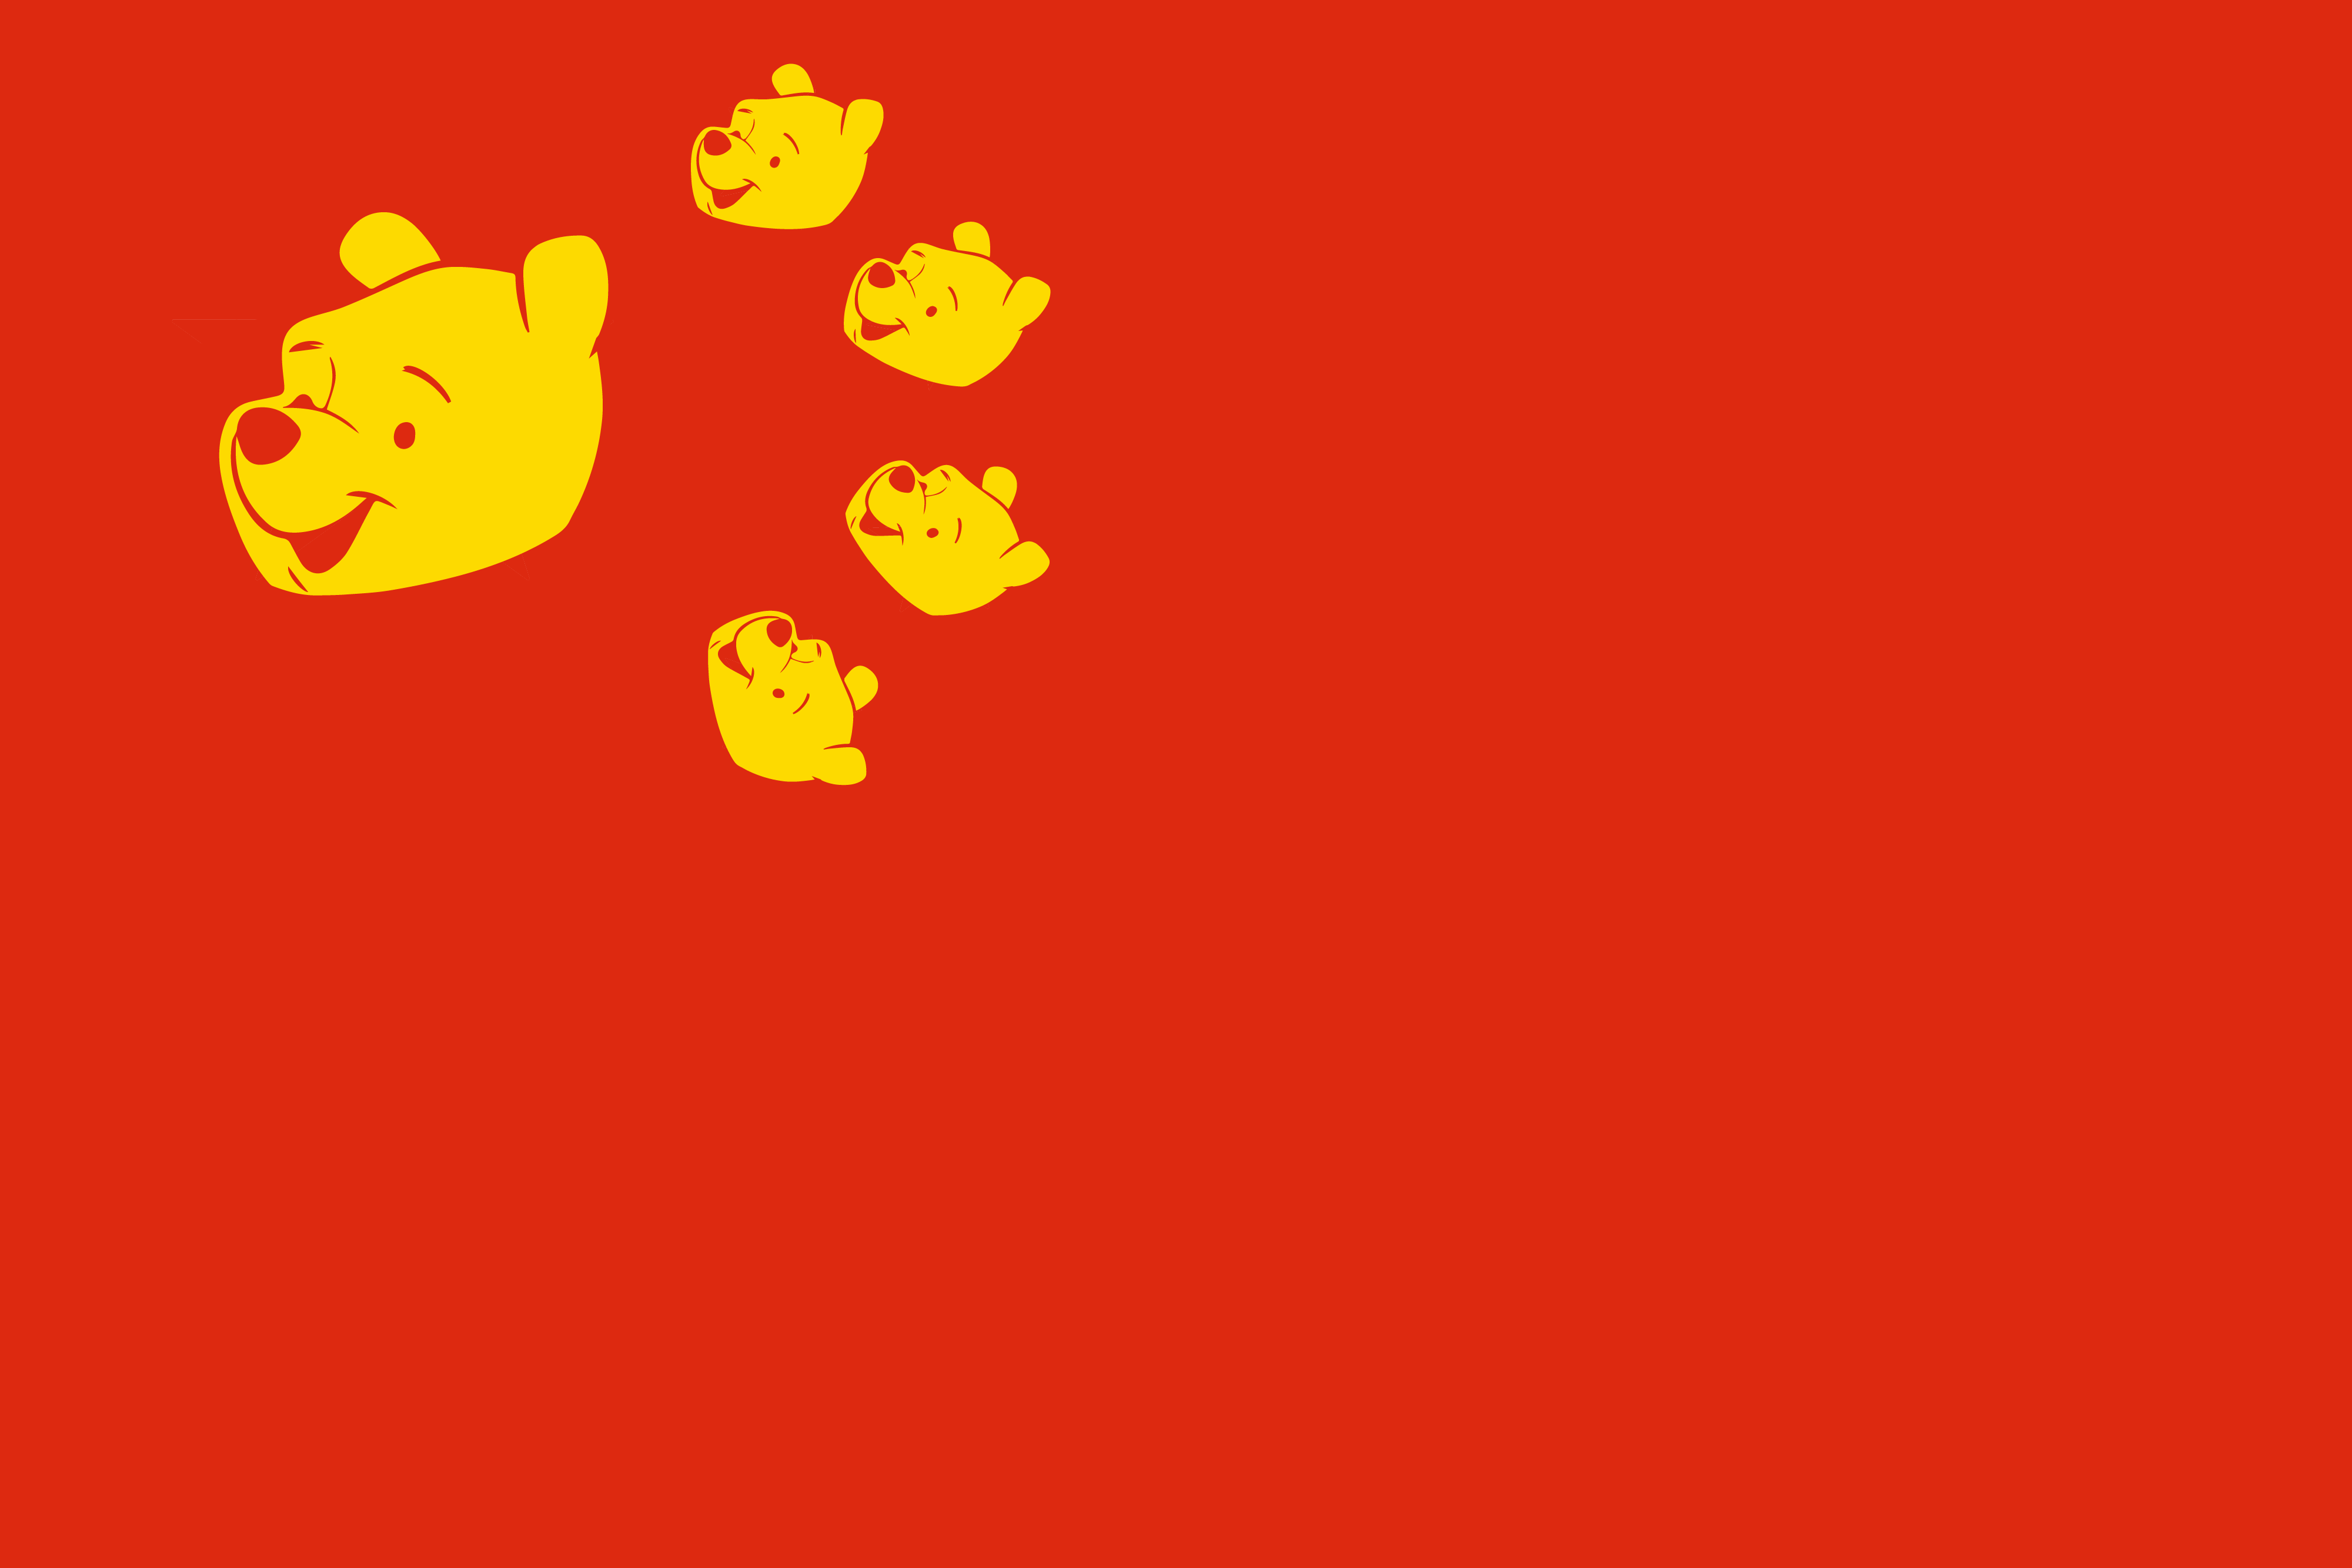 HUMOR Parody Flag China Chinese Flag Winnie The Pooh Communism Minimalism Simple Background Red Back 4000x2667